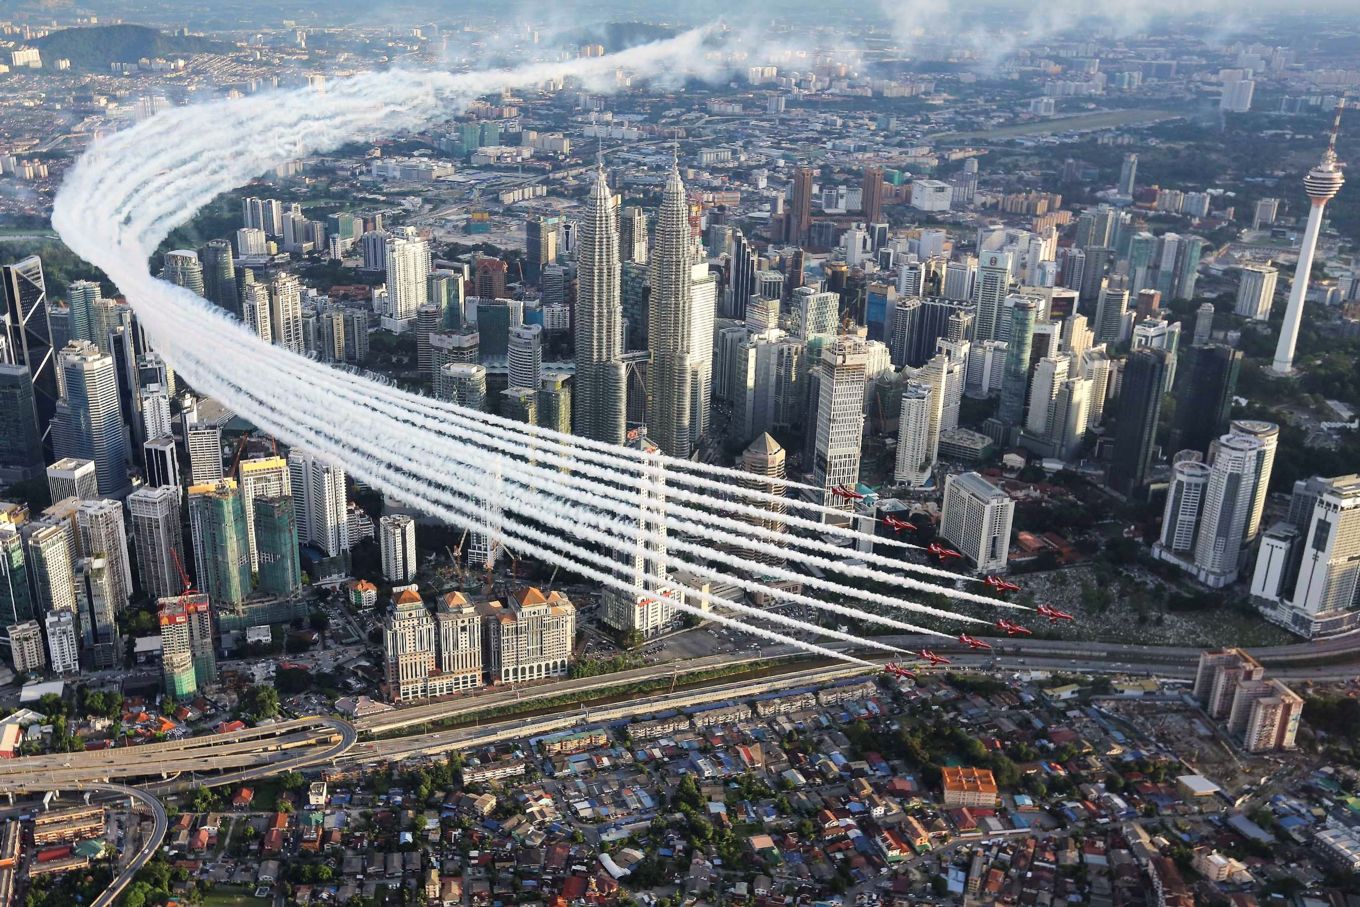 The Red Arrows perform a flypast of the Petronas Twin Towers in Kuala Lumpur, Malaysia, in 2016.